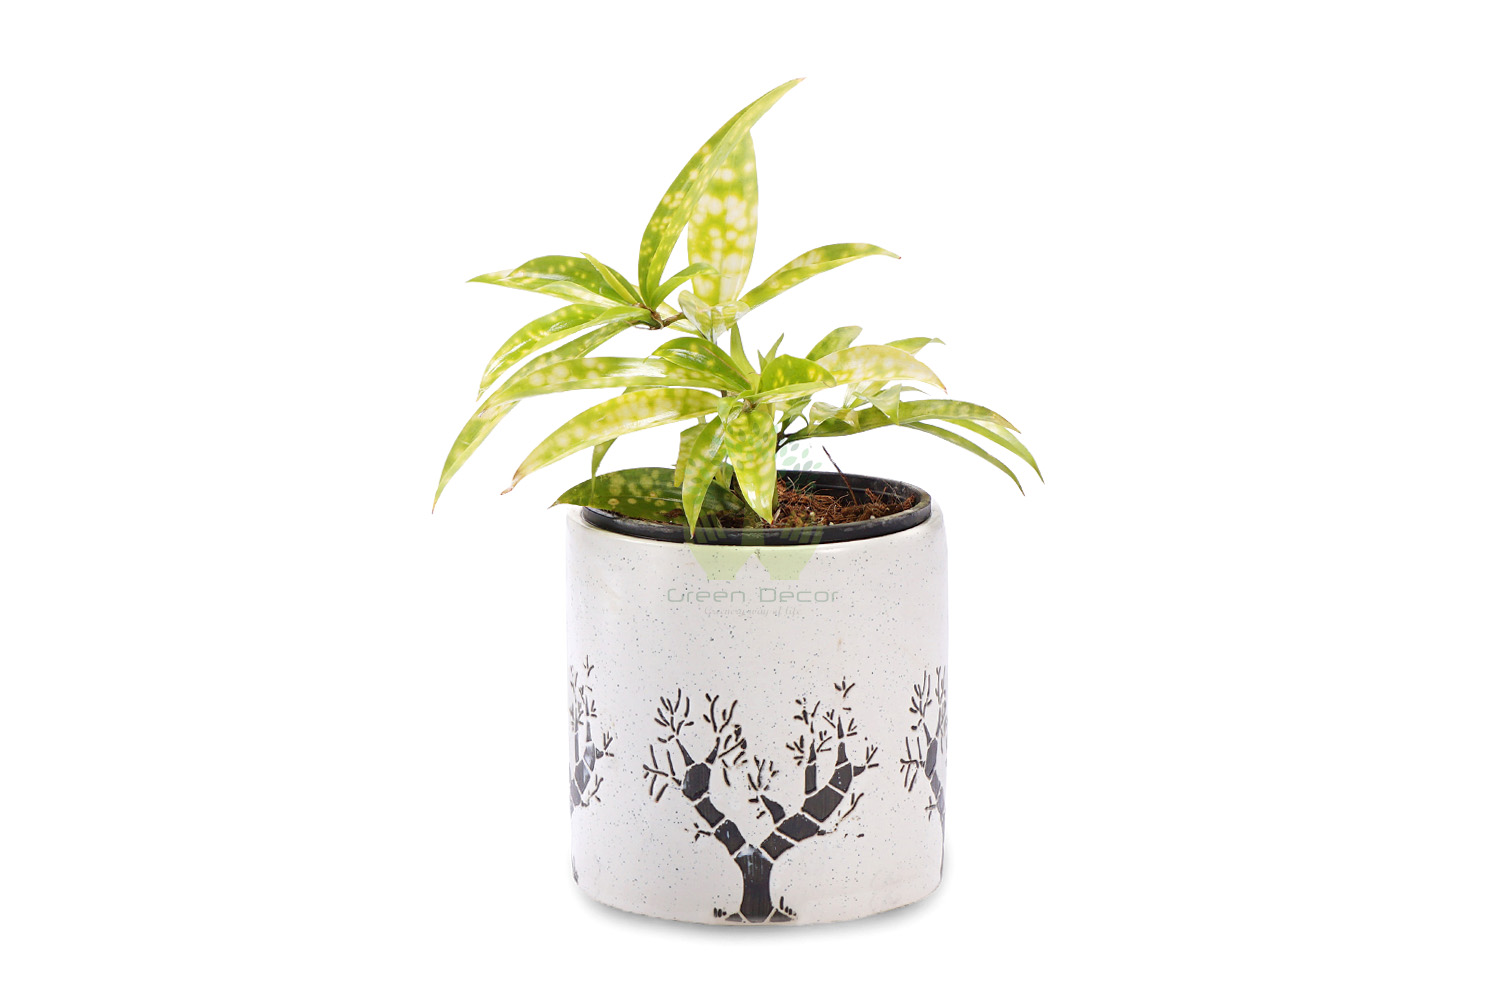 Buy Croton Codiaeum Plants , White Pots and seeds in Delhi NCR by the best online nursery shop Greendecor.